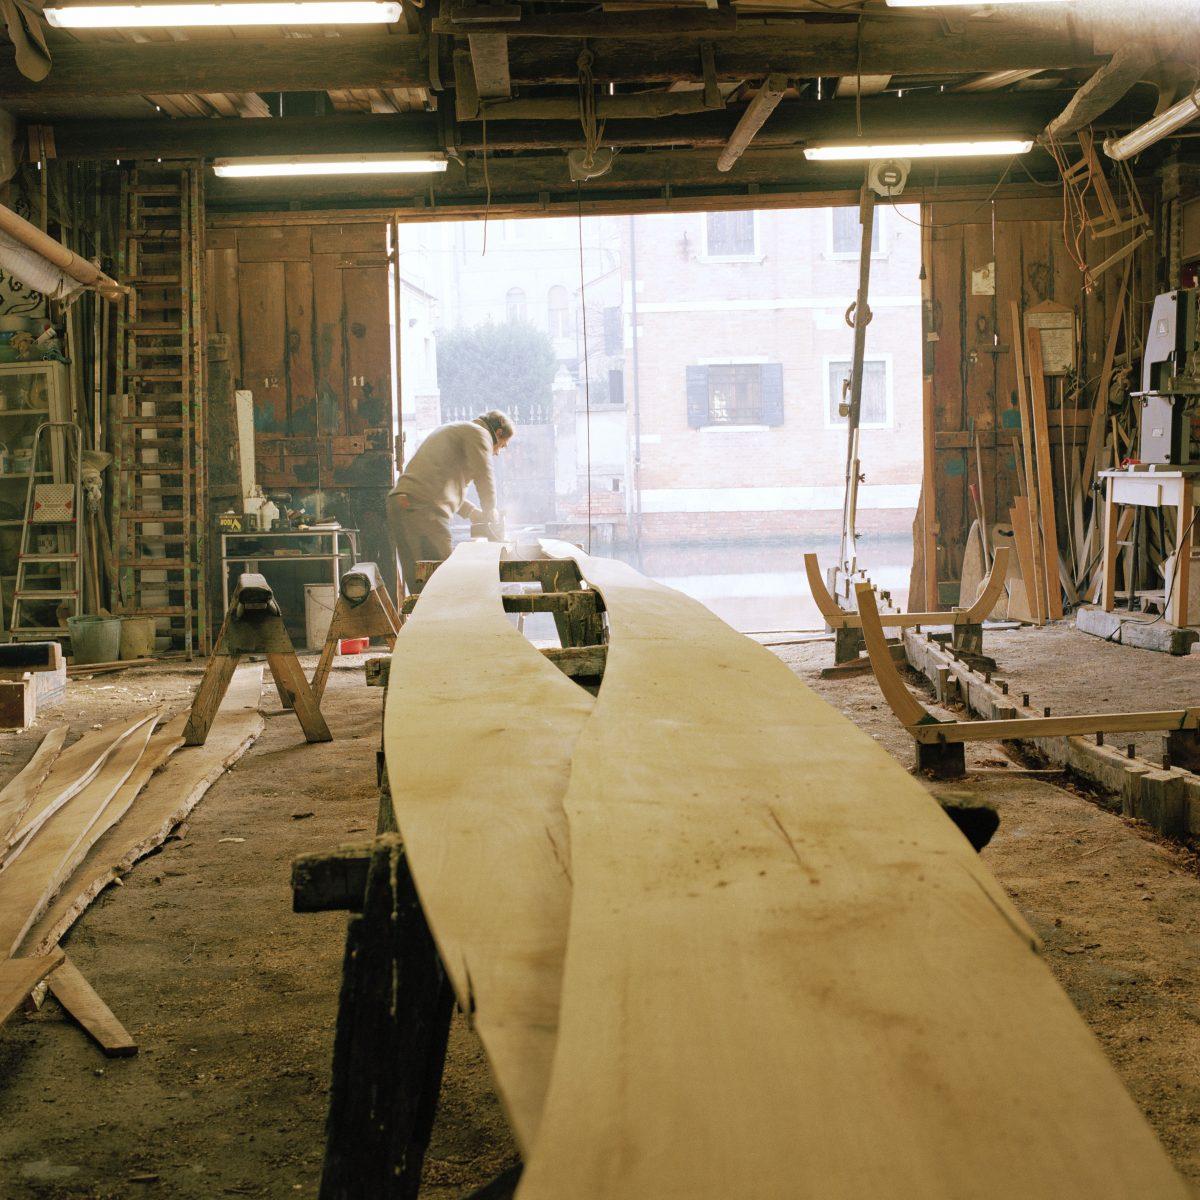 The 1884 boat-length wooden beam (R) with its metal markers is still used to construct gondolas. (Susanna Pozzoli/Michelangelo Foundation for Creativity and Craftsmanship)